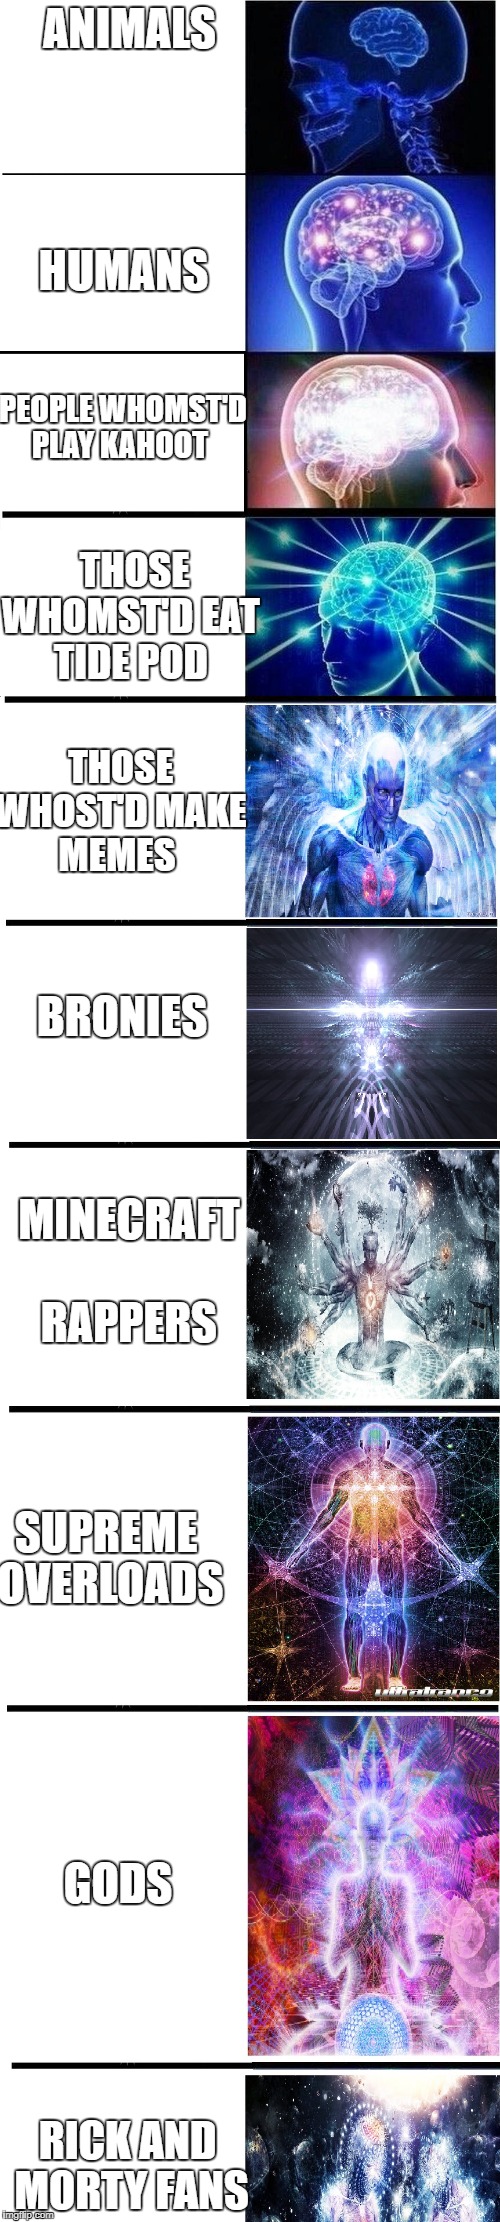 expanding brain meme | ANIMALS; HUMANS; PEOPLE WHOMST'D PLAY KAHOOT; THOSE WHOMST'D EAT TIDE POD; THOSE WHOST'D MAKE MEMES; BRONIES; MINECRAFT RAPPERS; SUPREME OVERLOADS; GODS; RICK AND MORTY FANS | image tagged in expanding brain meme | made w/ Imgflip meme maker